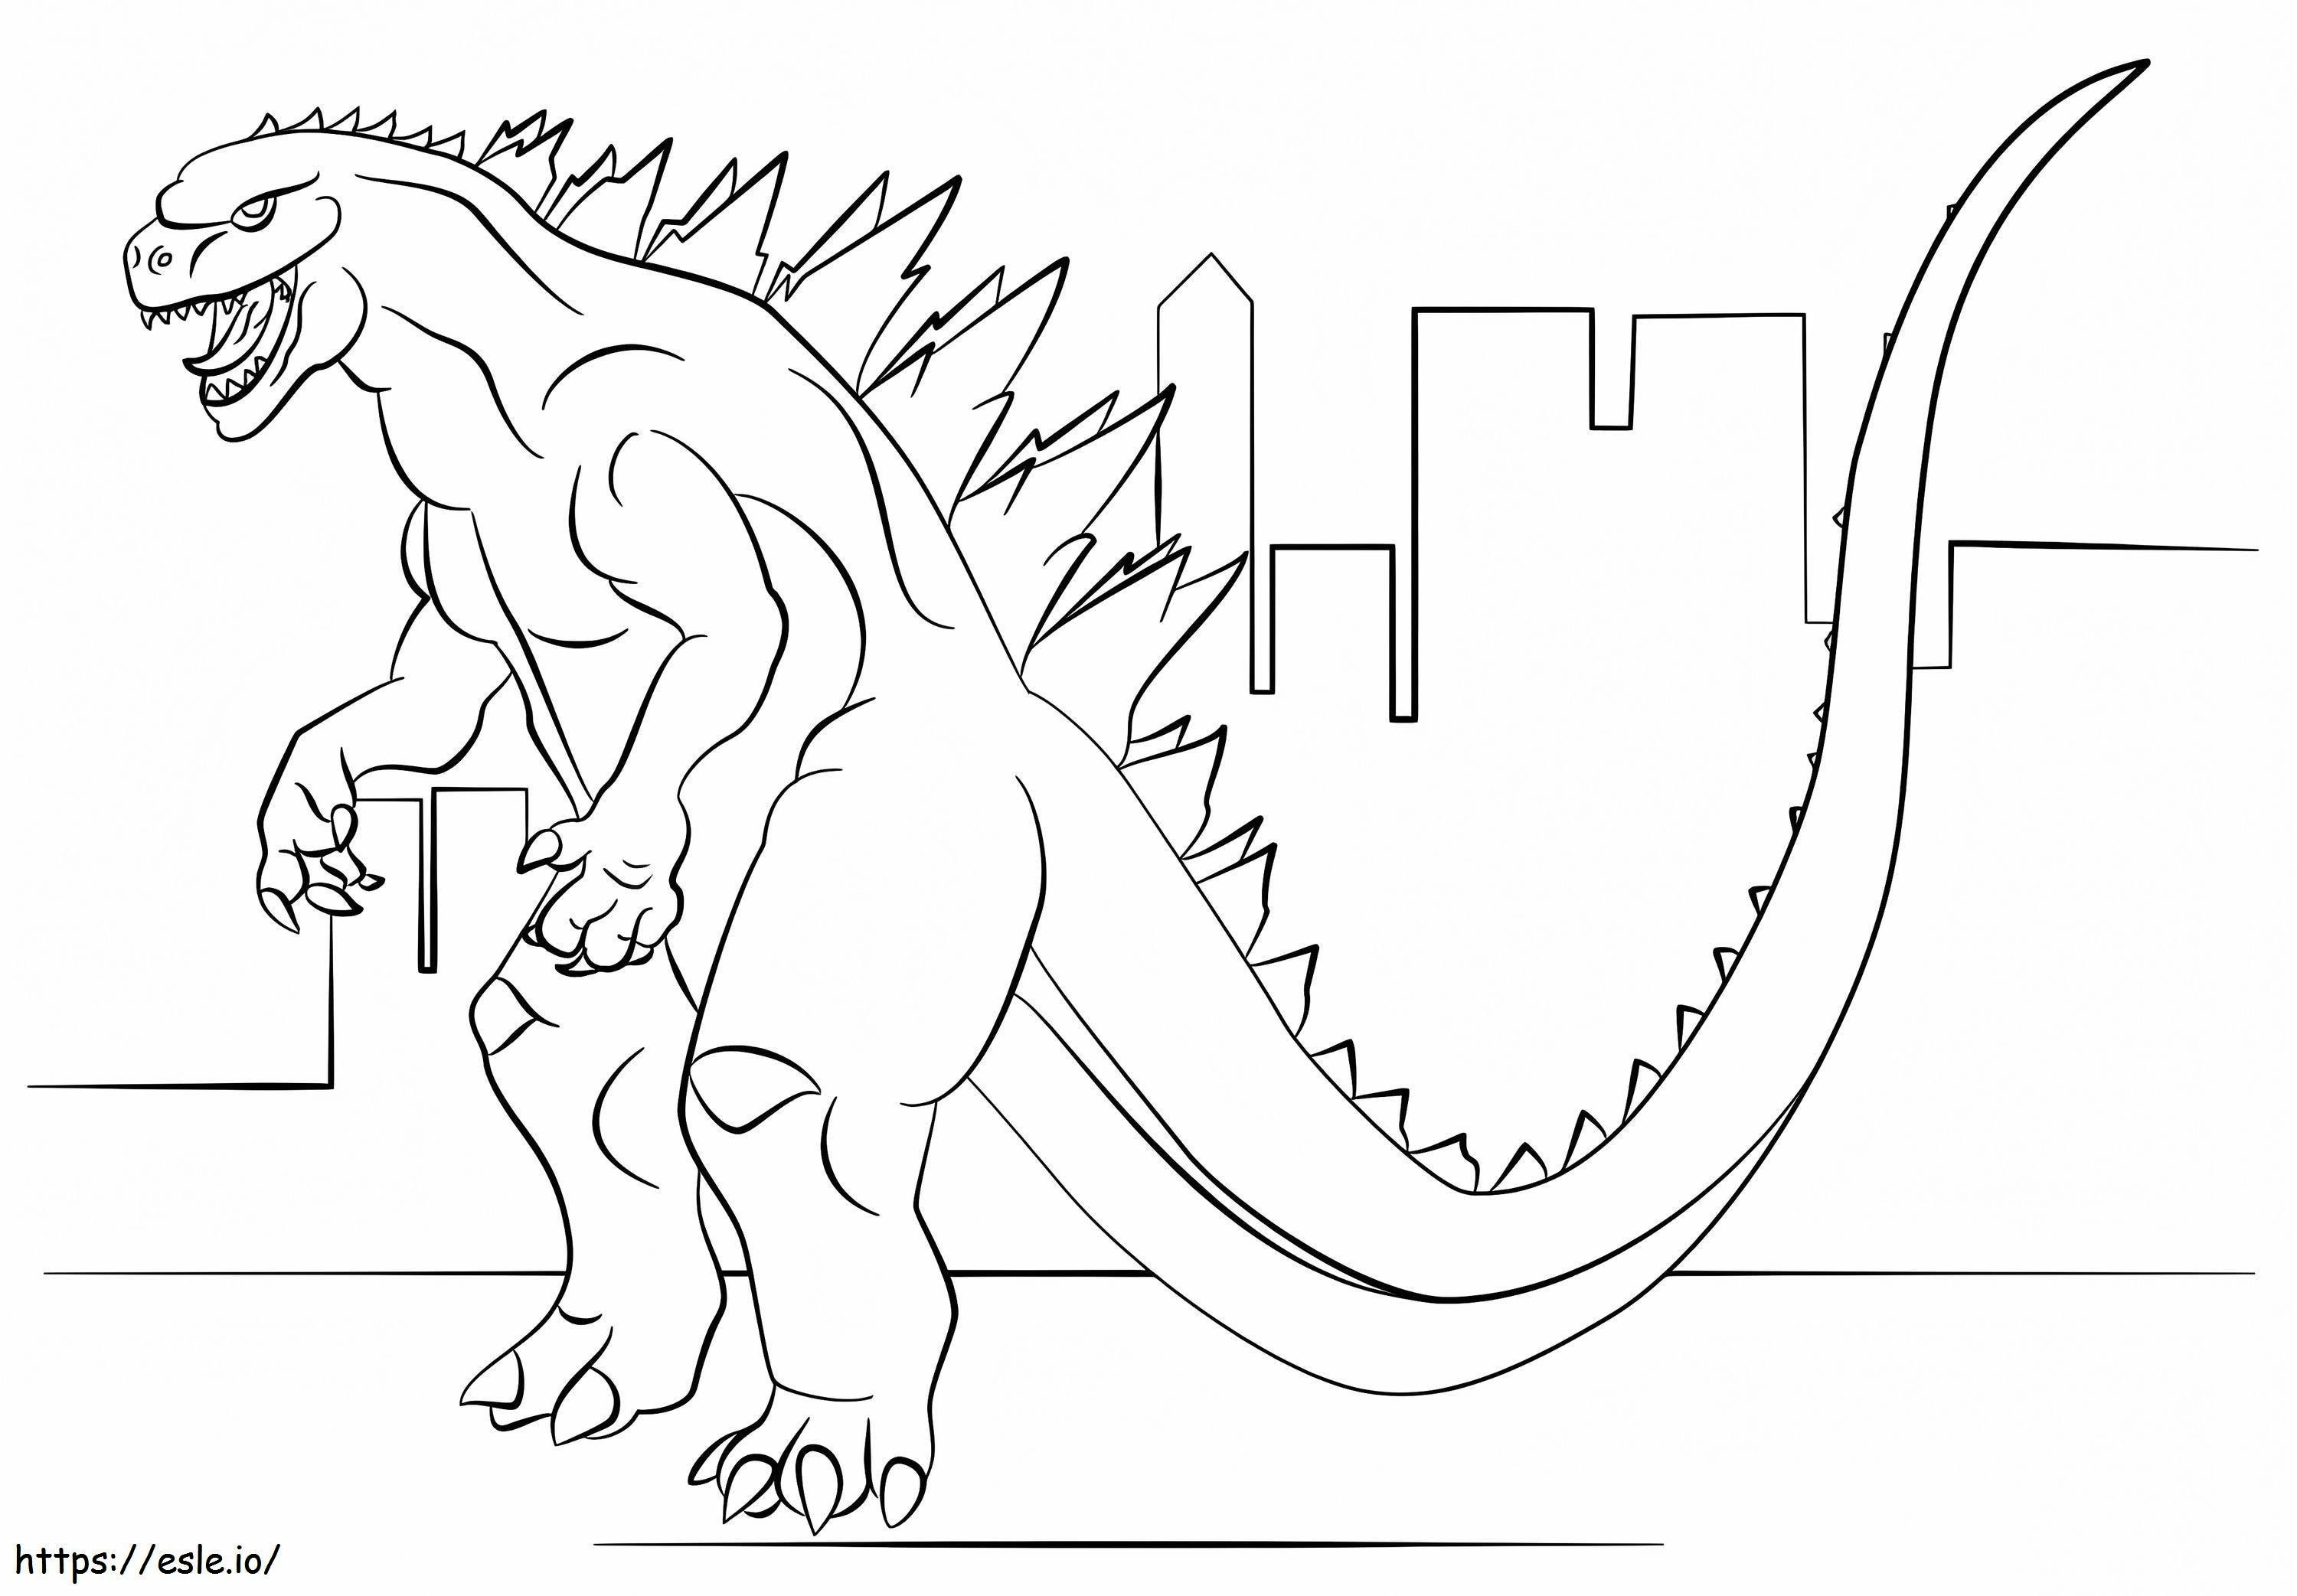 Godzilla Is Angry coloring page